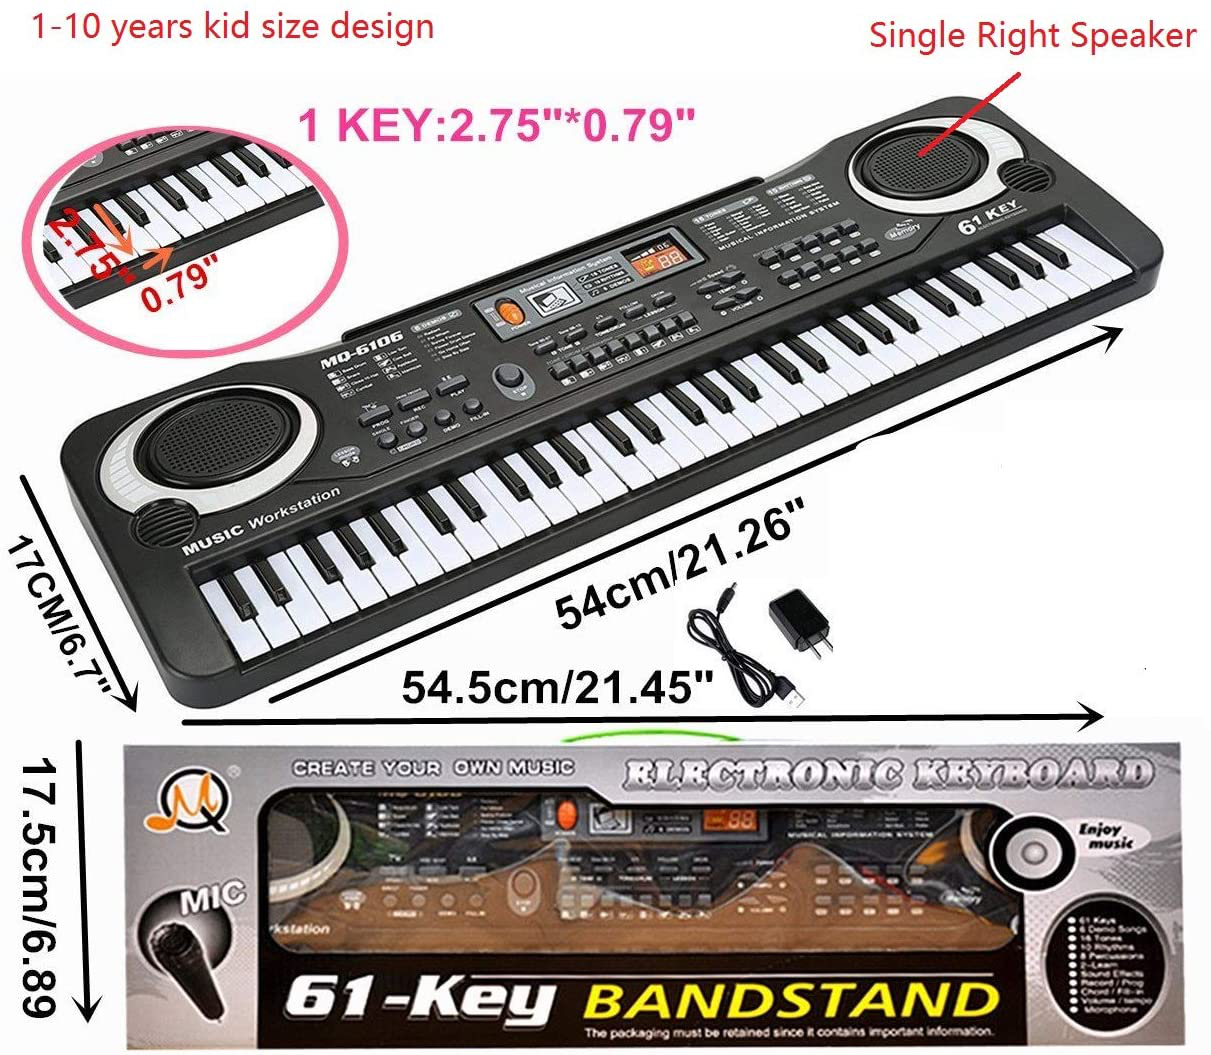 Keyboard Piano Kids 61 Key Electronic Digital Piano Musical Instrument Kit with Microphone Music Home Teaching Christmas Gift Toys for Boy Girls (Black)